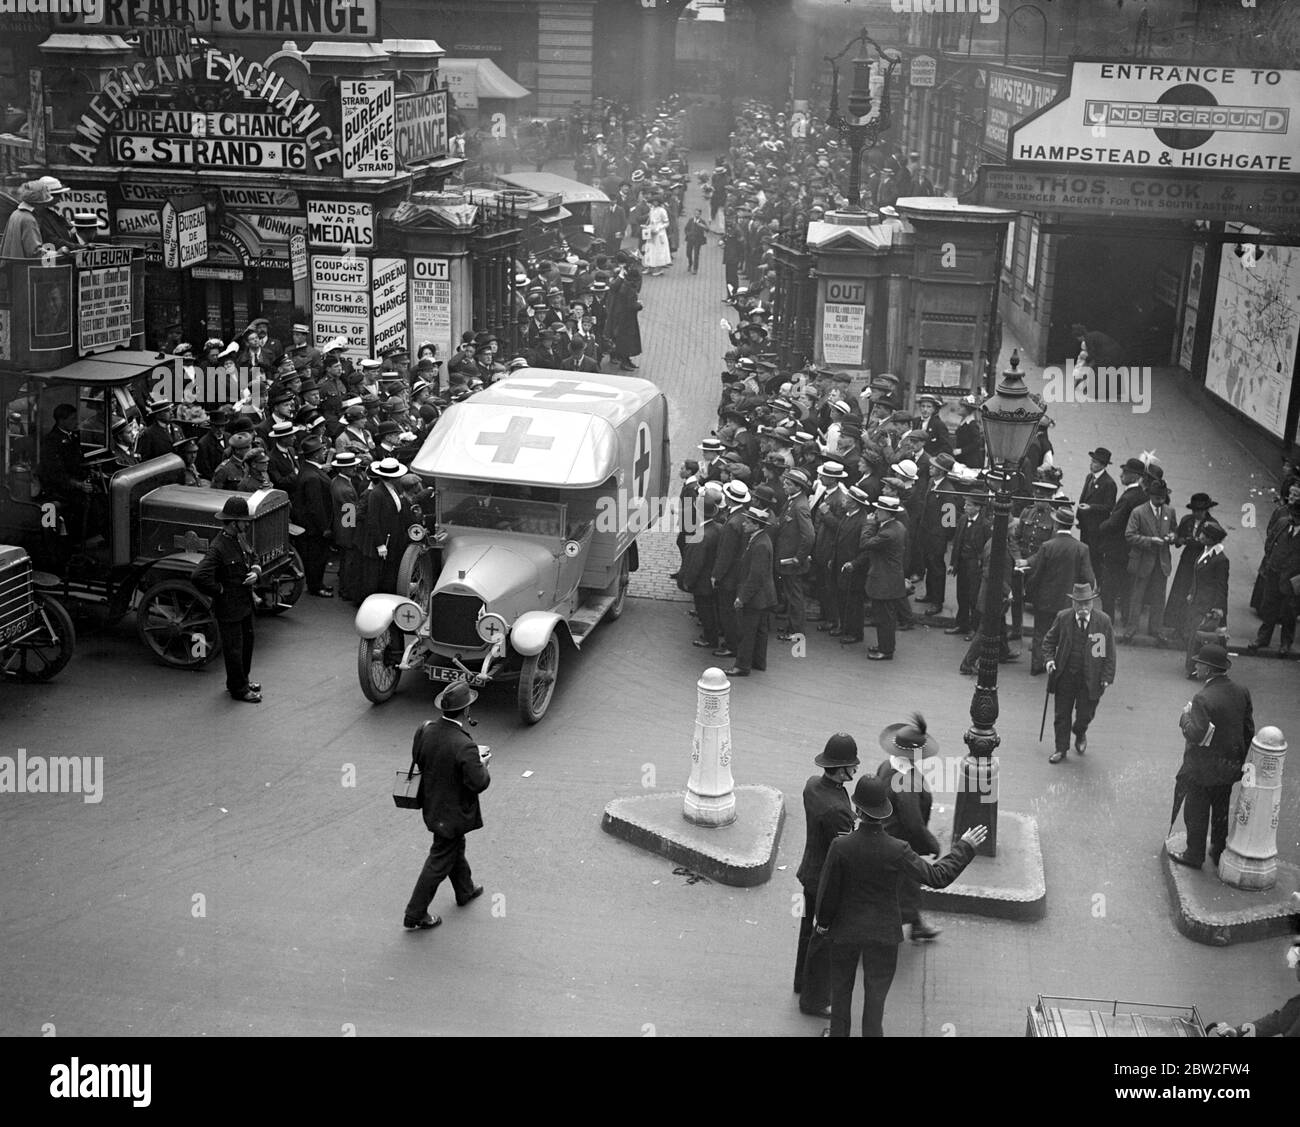 After the great advance - Ambulance leaving Charing Cross War 1914 - 1918. Stock Photo